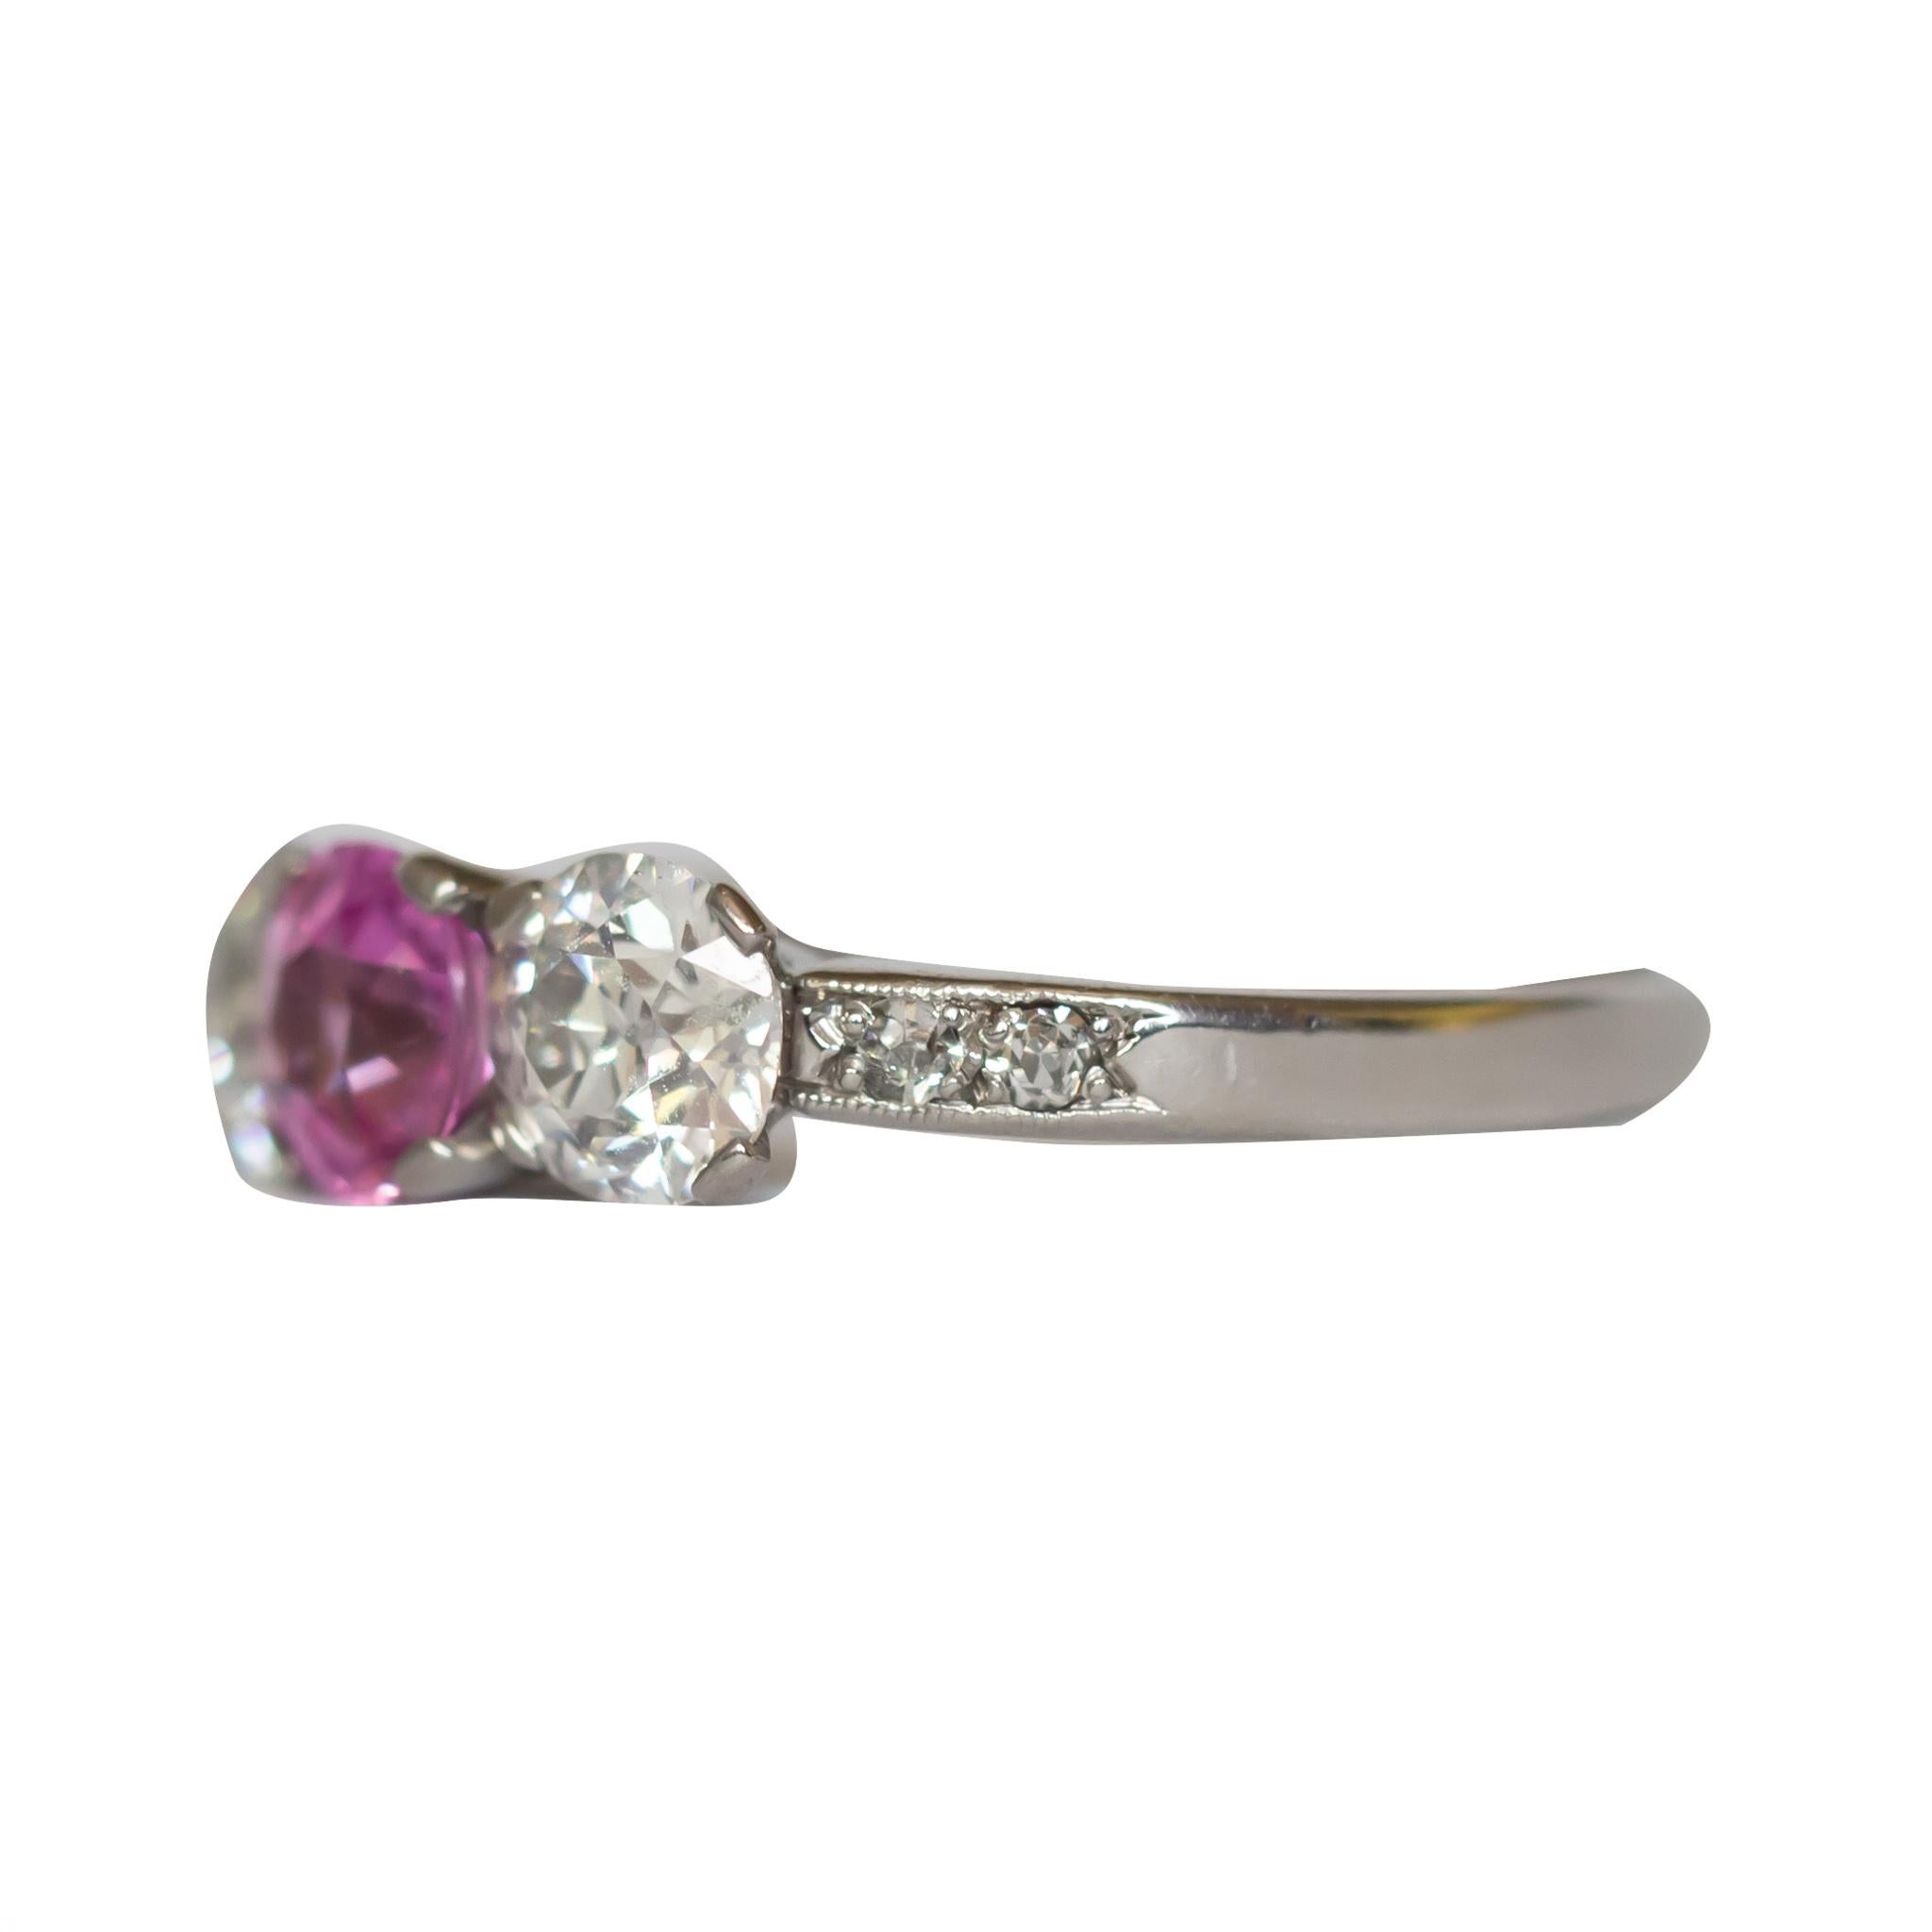 Ring Size: 9.25
Metal Type: Platinum [Hallmarked, and Tested]
Weight:  3 grams

Sapphire Details:
Weight: 1.00 carat
Cut: Old European Brilliant
Color: Pink, Unheated
Clarity: VS


Diamond Details:
Weight: 1.35 carat, total weight (2 stones)
Cut: